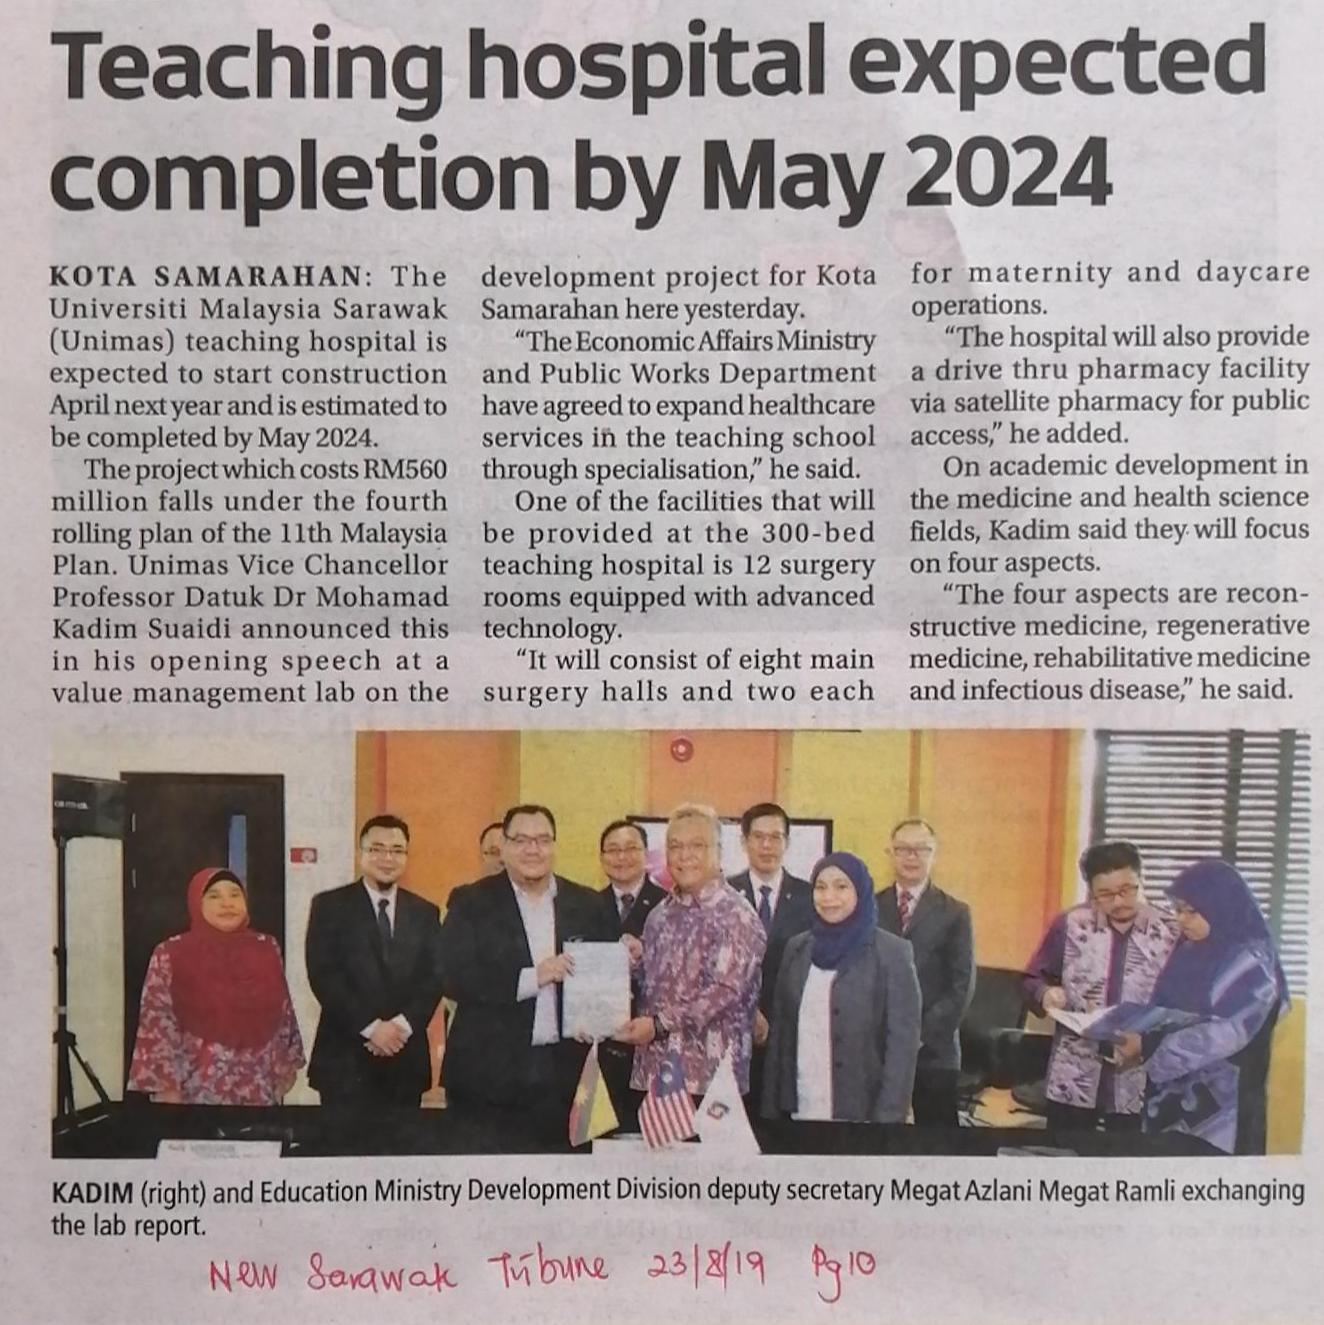 Teaching hospital expected completion by May 2024 - UNIMAS